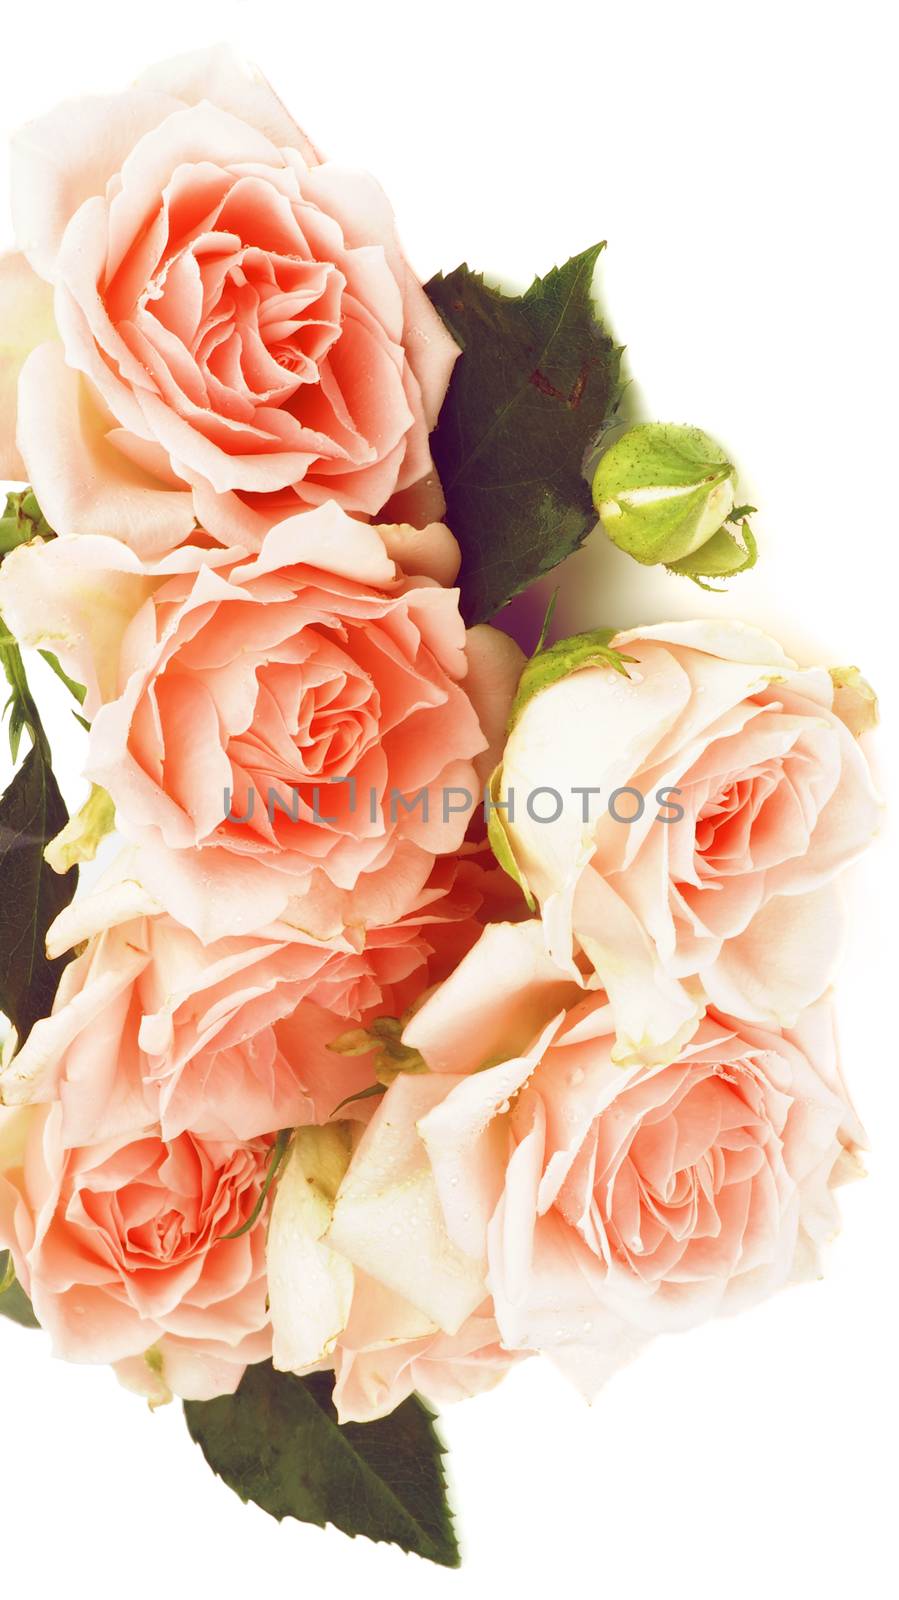 Frame of Beauty Cream Pink Roses with Leafs and Bud isolated on white background. Retro Styled